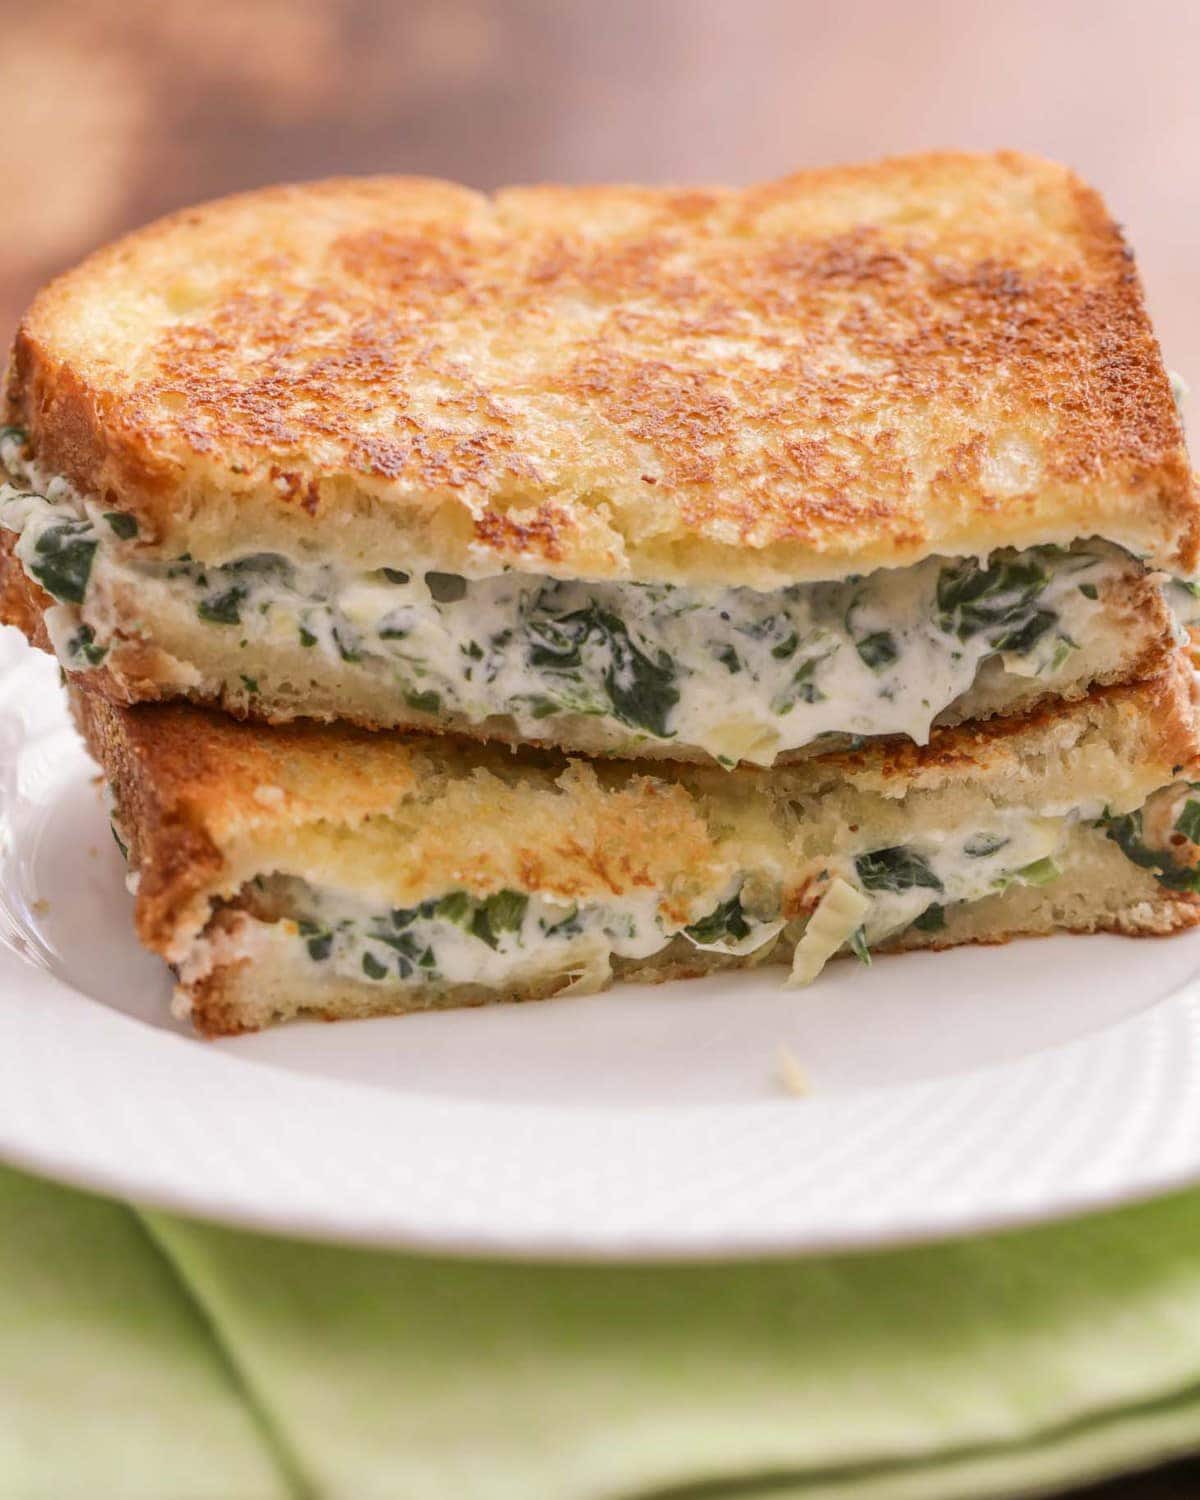 Spinach Artichoke Grilled Cheese Sandwich on white plate